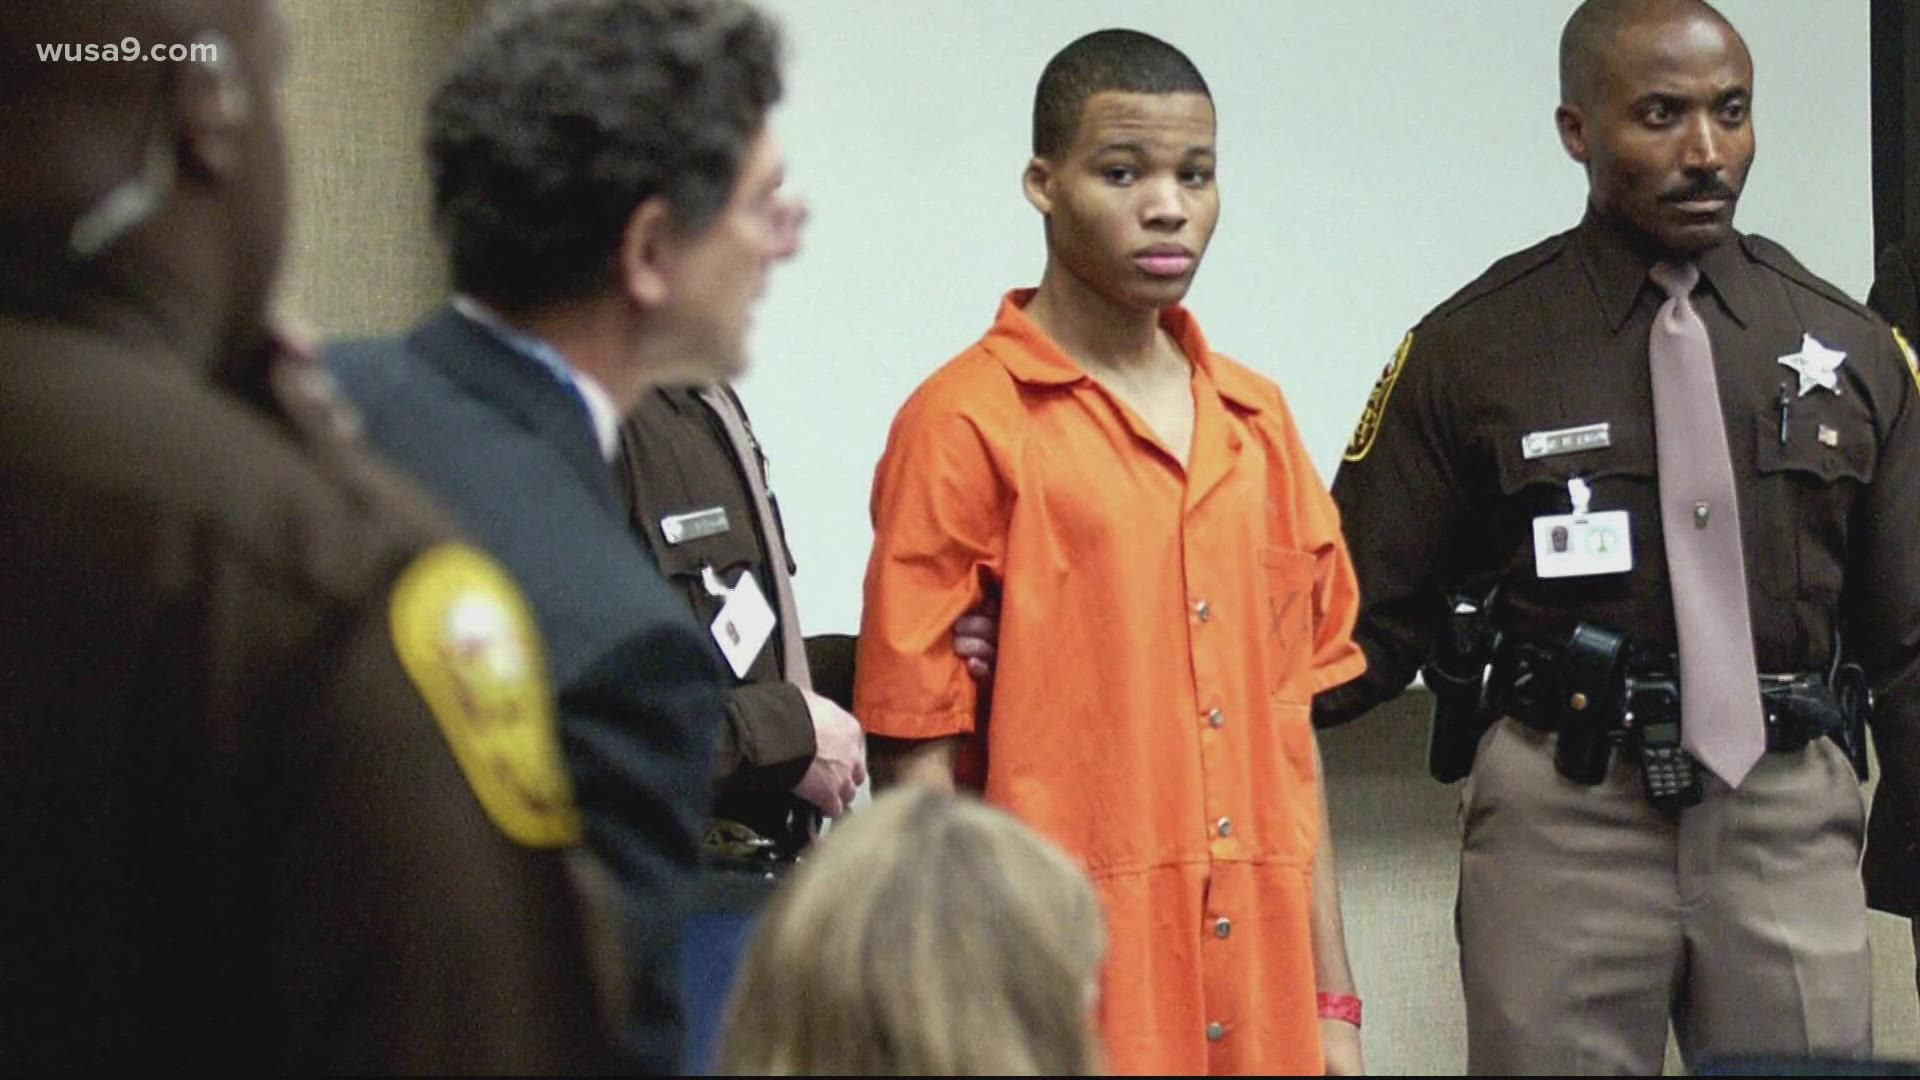 Malvo's attorneys argue his sentence goes against a 2012 Supreme Court ruling barring mandatory life sentences without parole for juvenile offenders.